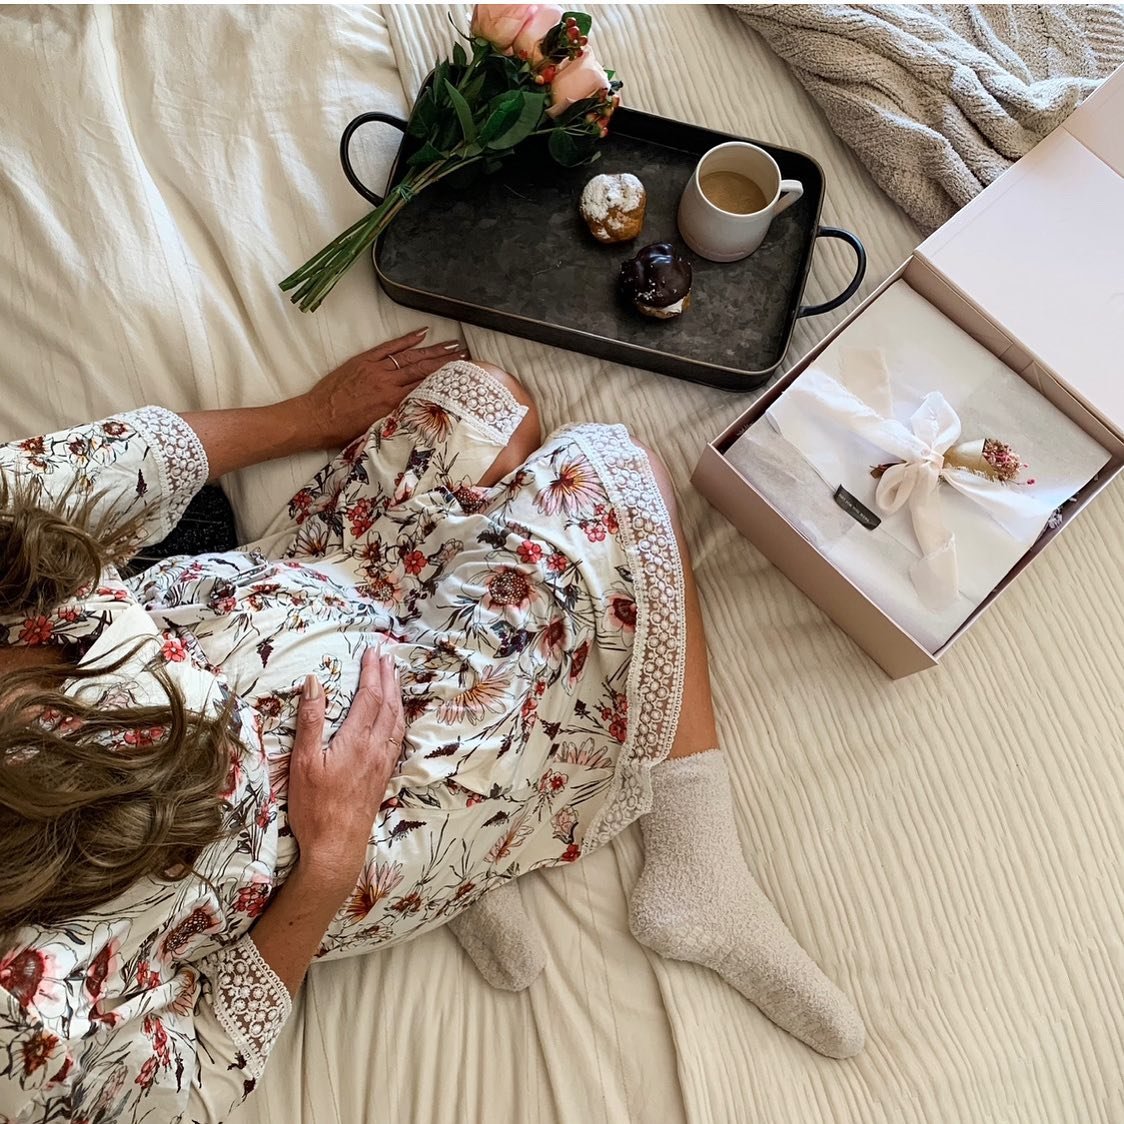 What&rsquo;s on the agenda for Mother&rsquo;s Day? We asked a handful of moms in our community for their favorite way to spend the day. Read on for inspiration!
⠀⠀⠀⠀⠀⠀⠀⠀⠀
&ldquo;BREAKFAST IN BED! with a side of cuddles from my almost 3-year-old twin 